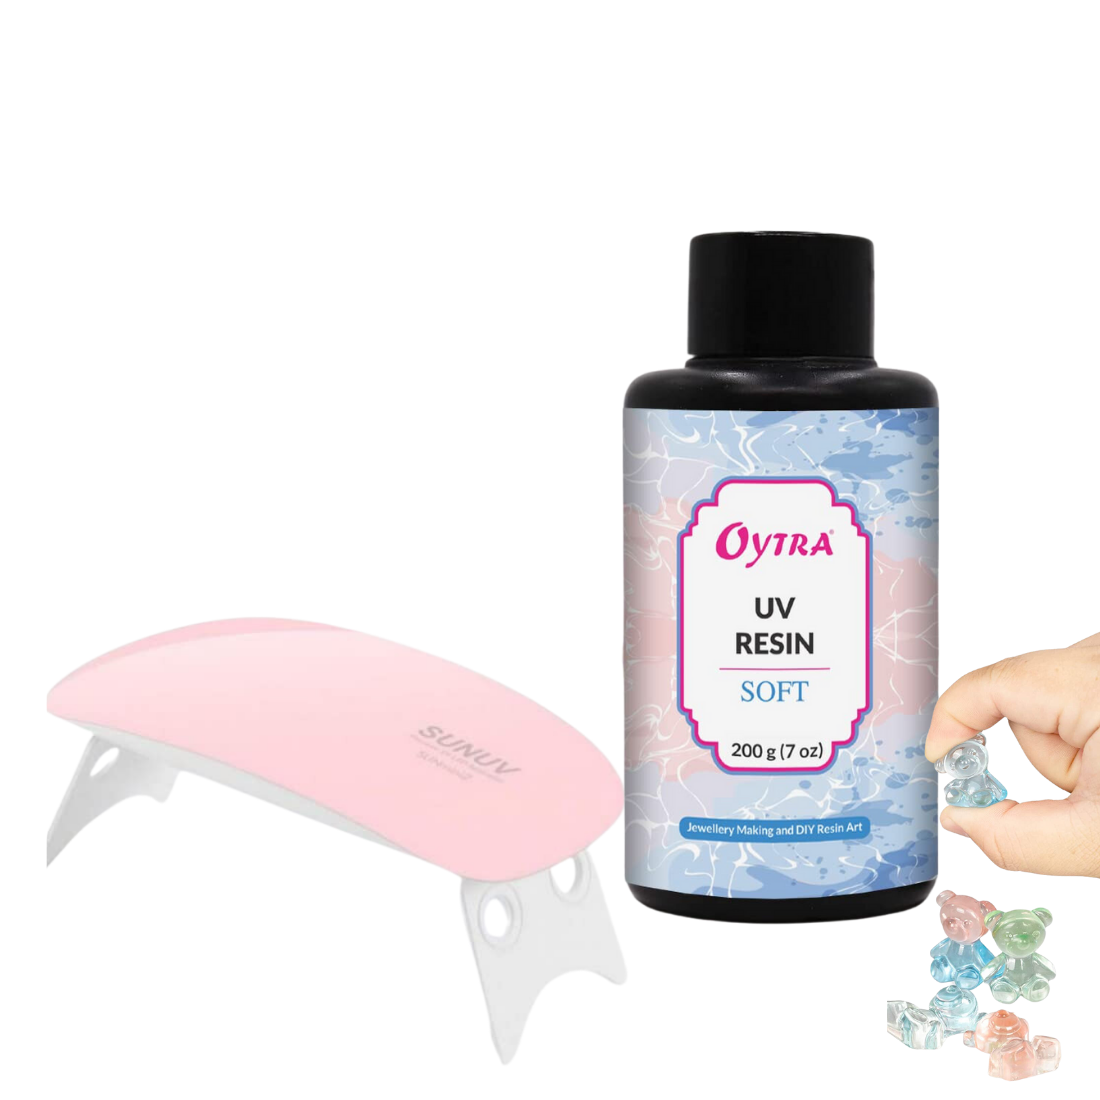 Oytra 200g UV Resin Soft and UV Lamp Combo